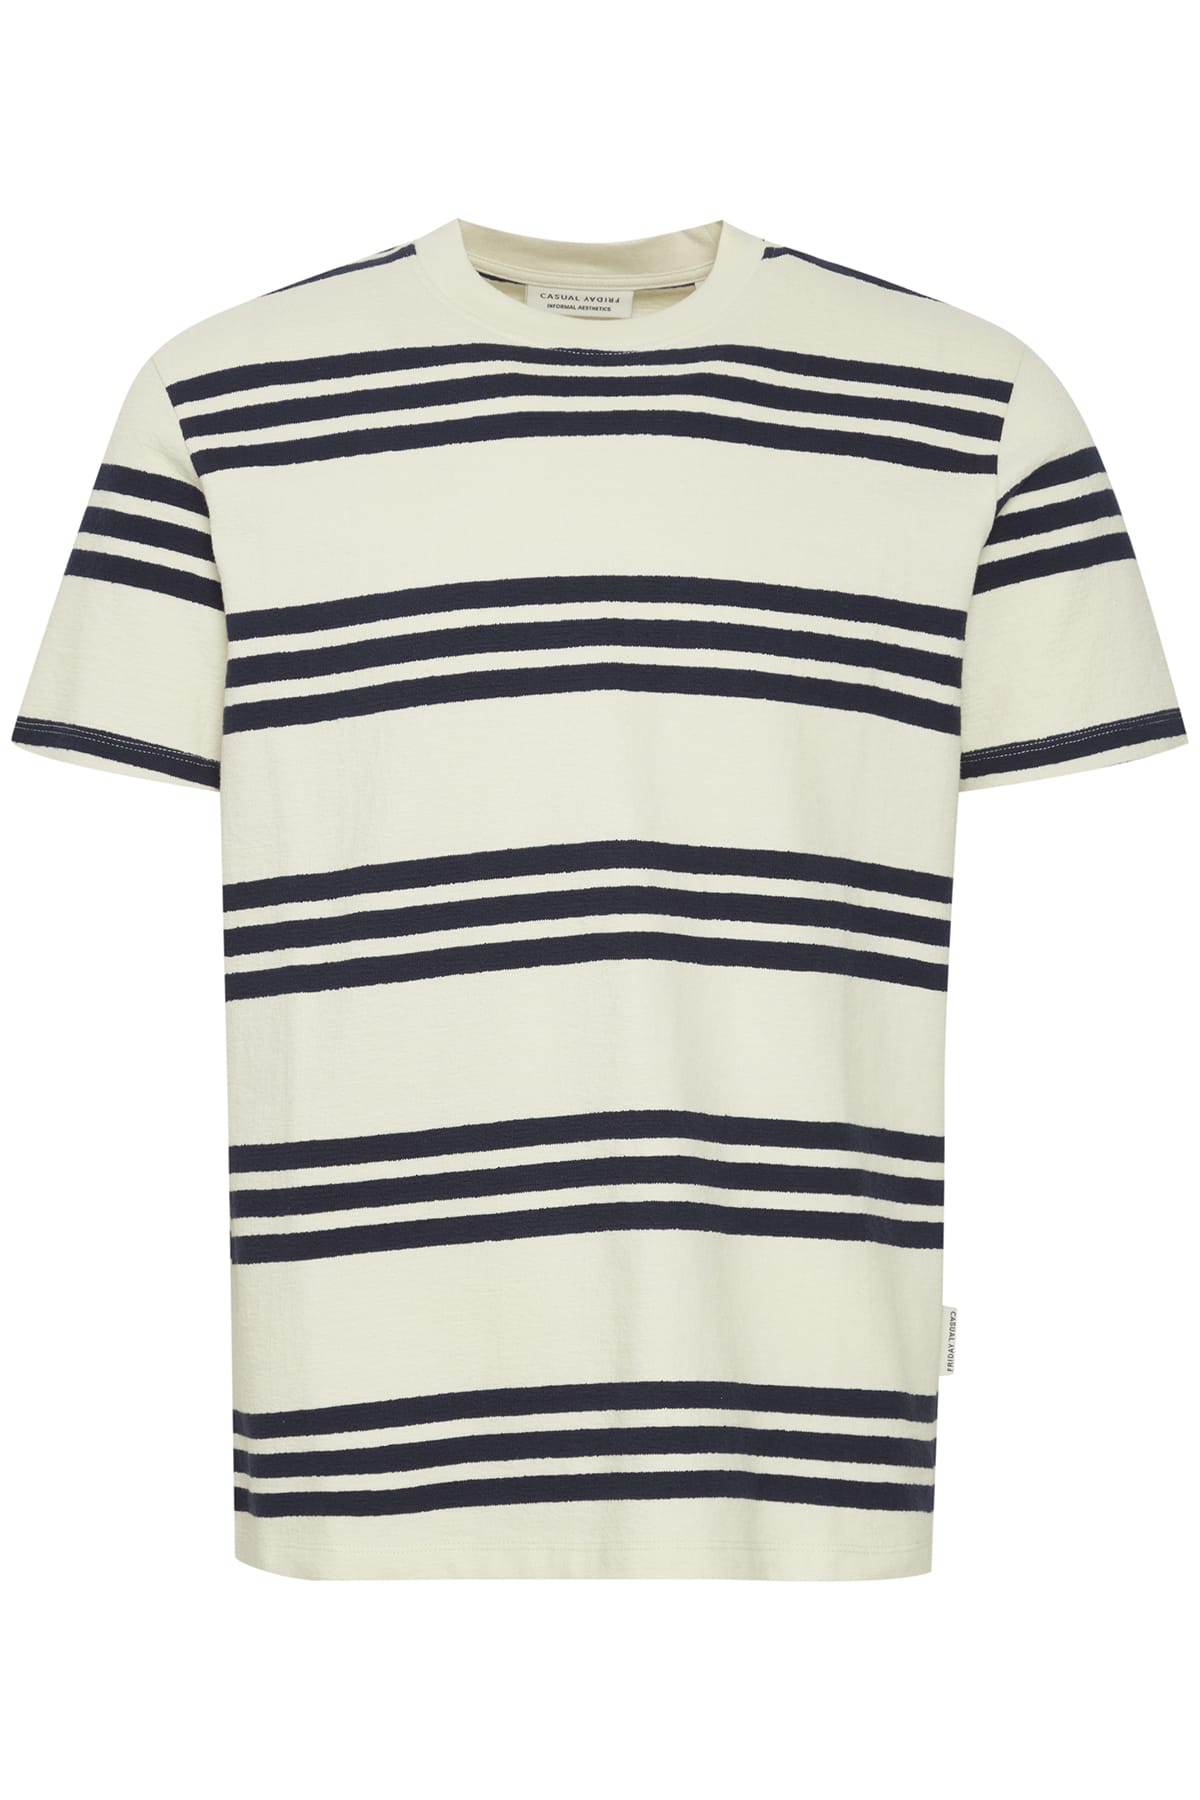 T-Shirt CFThor 0145 structured striped shirt White Asparagus T-Shirt Casual Friday 